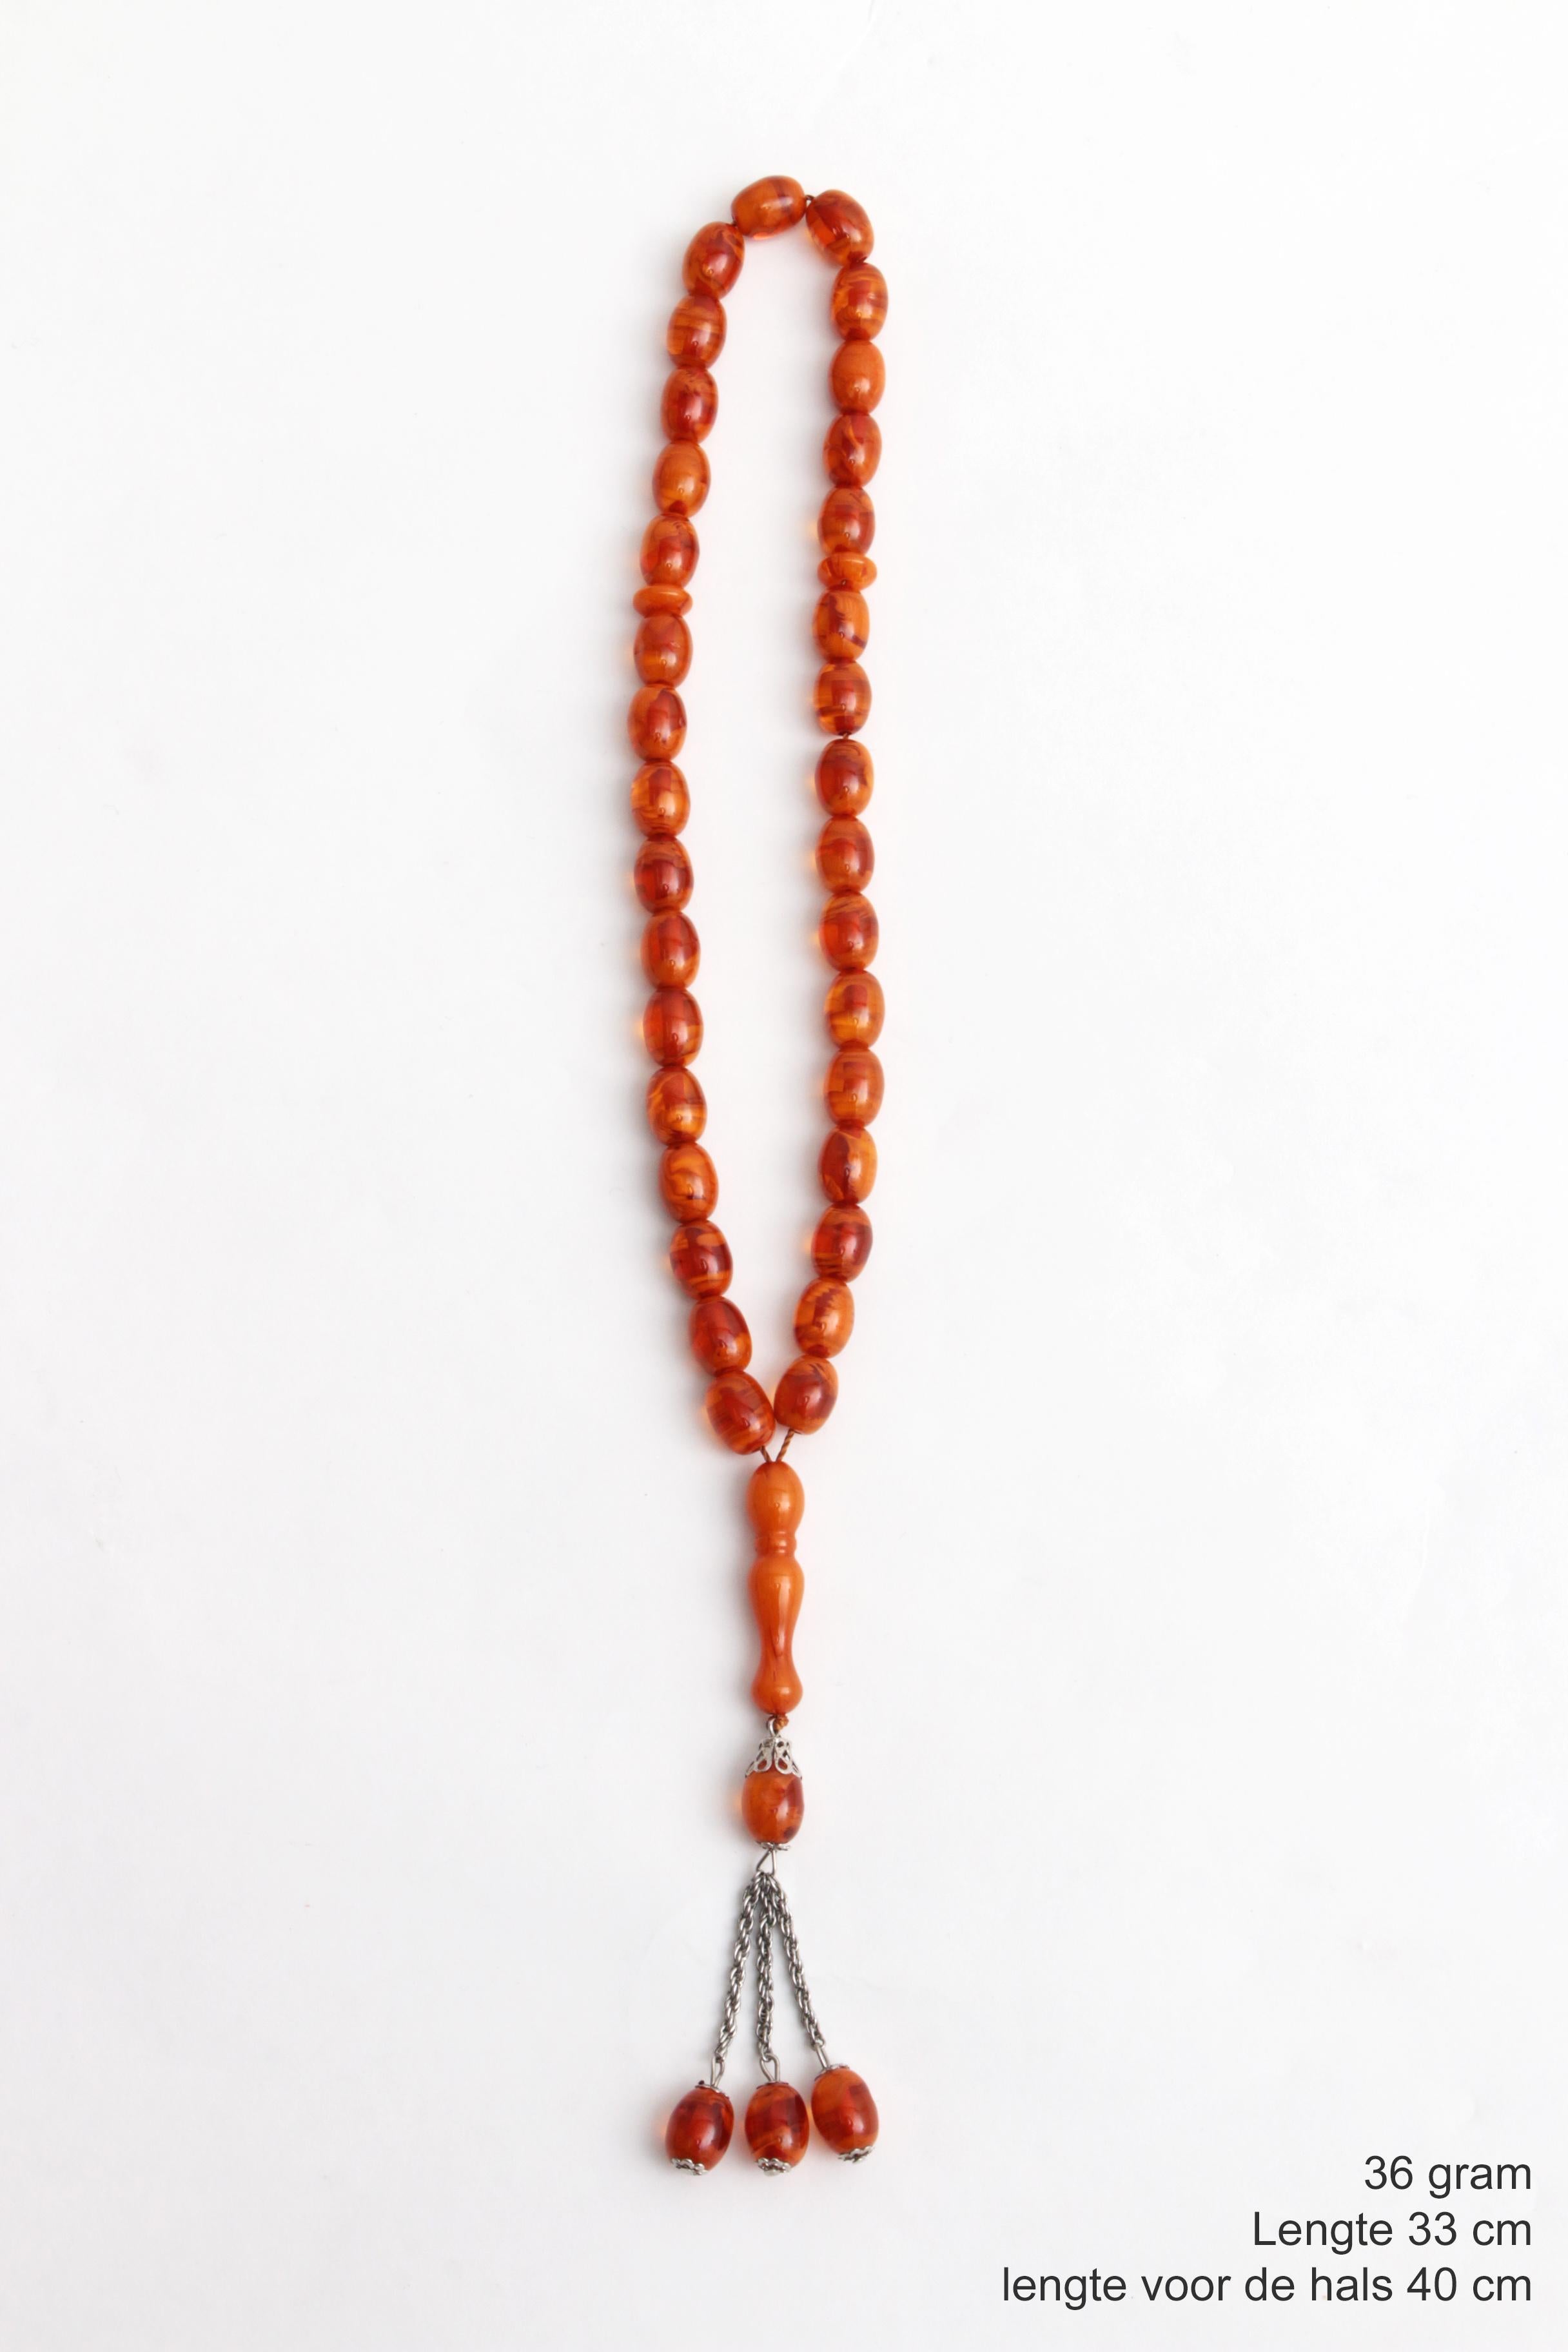 European Beautiful Prayer Necklace Made of Amber from the 1960s For Sale